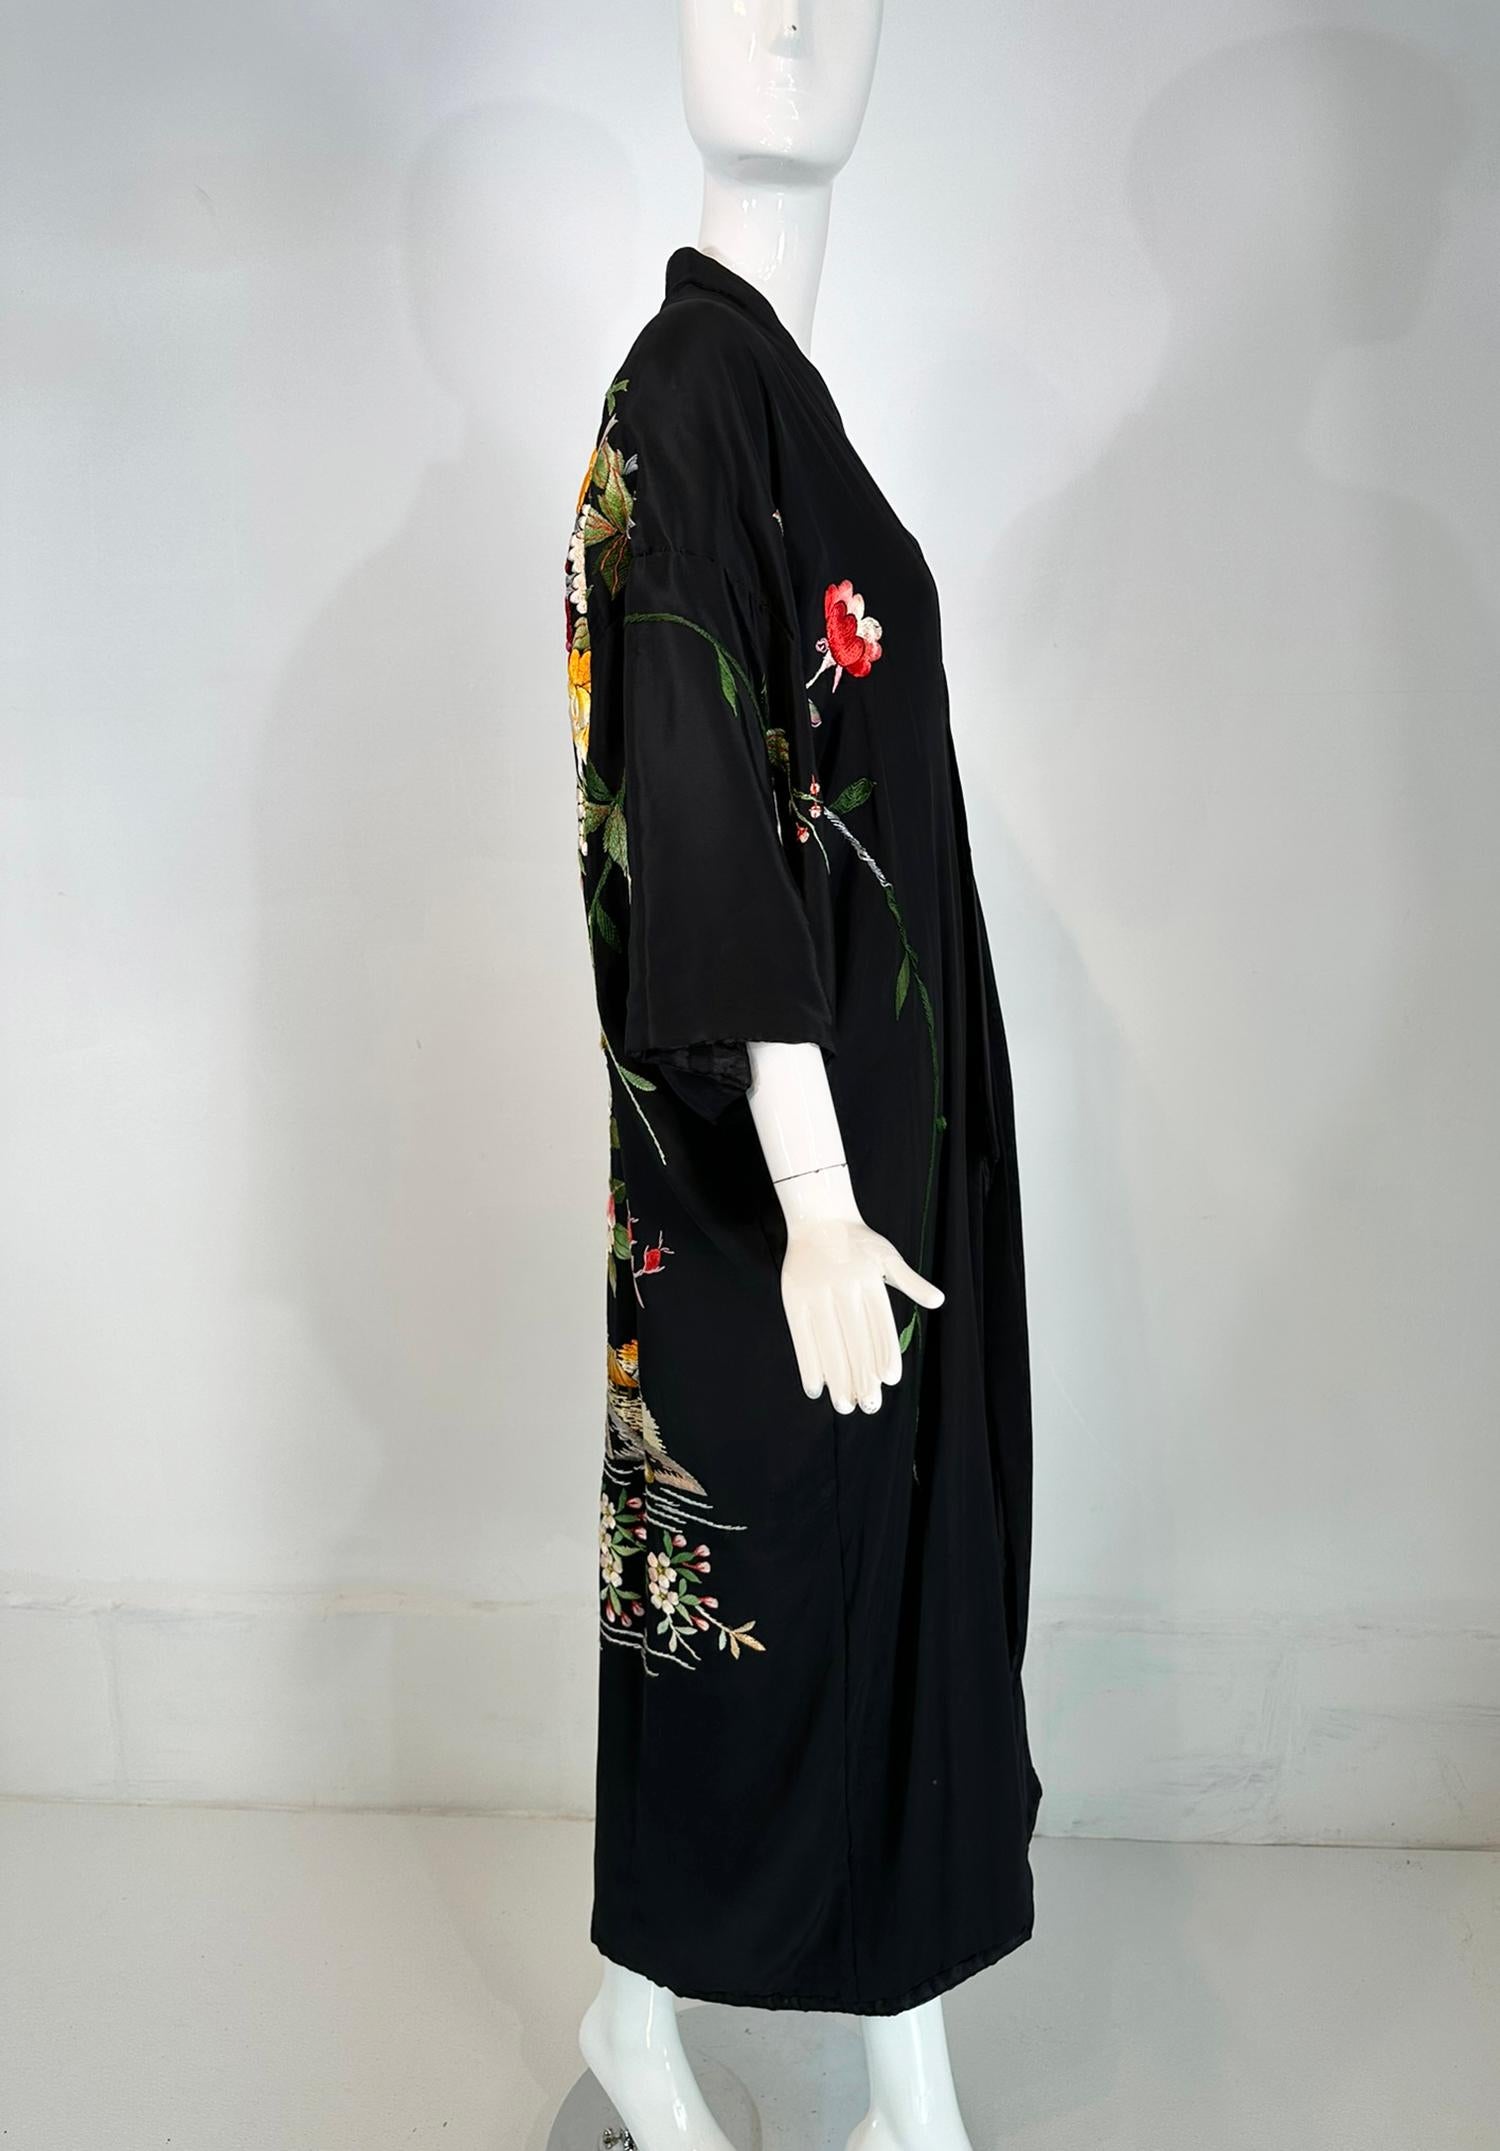 Vintage Black Rayon Heavily Floral Embroidered Kimono Robe 1930s-40s For Sale 8